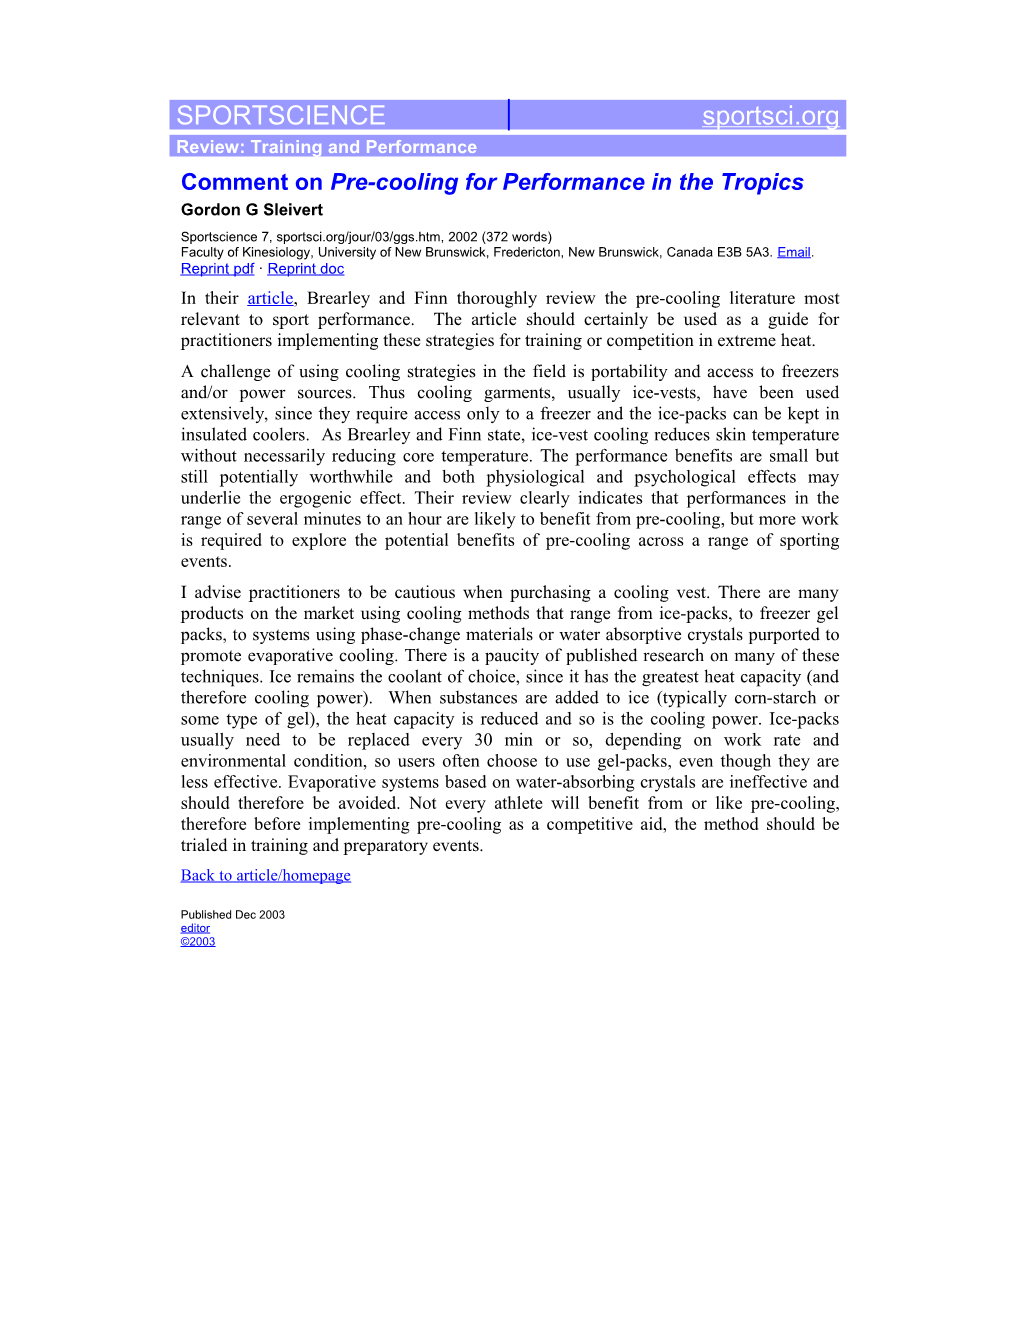 Comment on Pre-Cooling for Performance in the Tropics